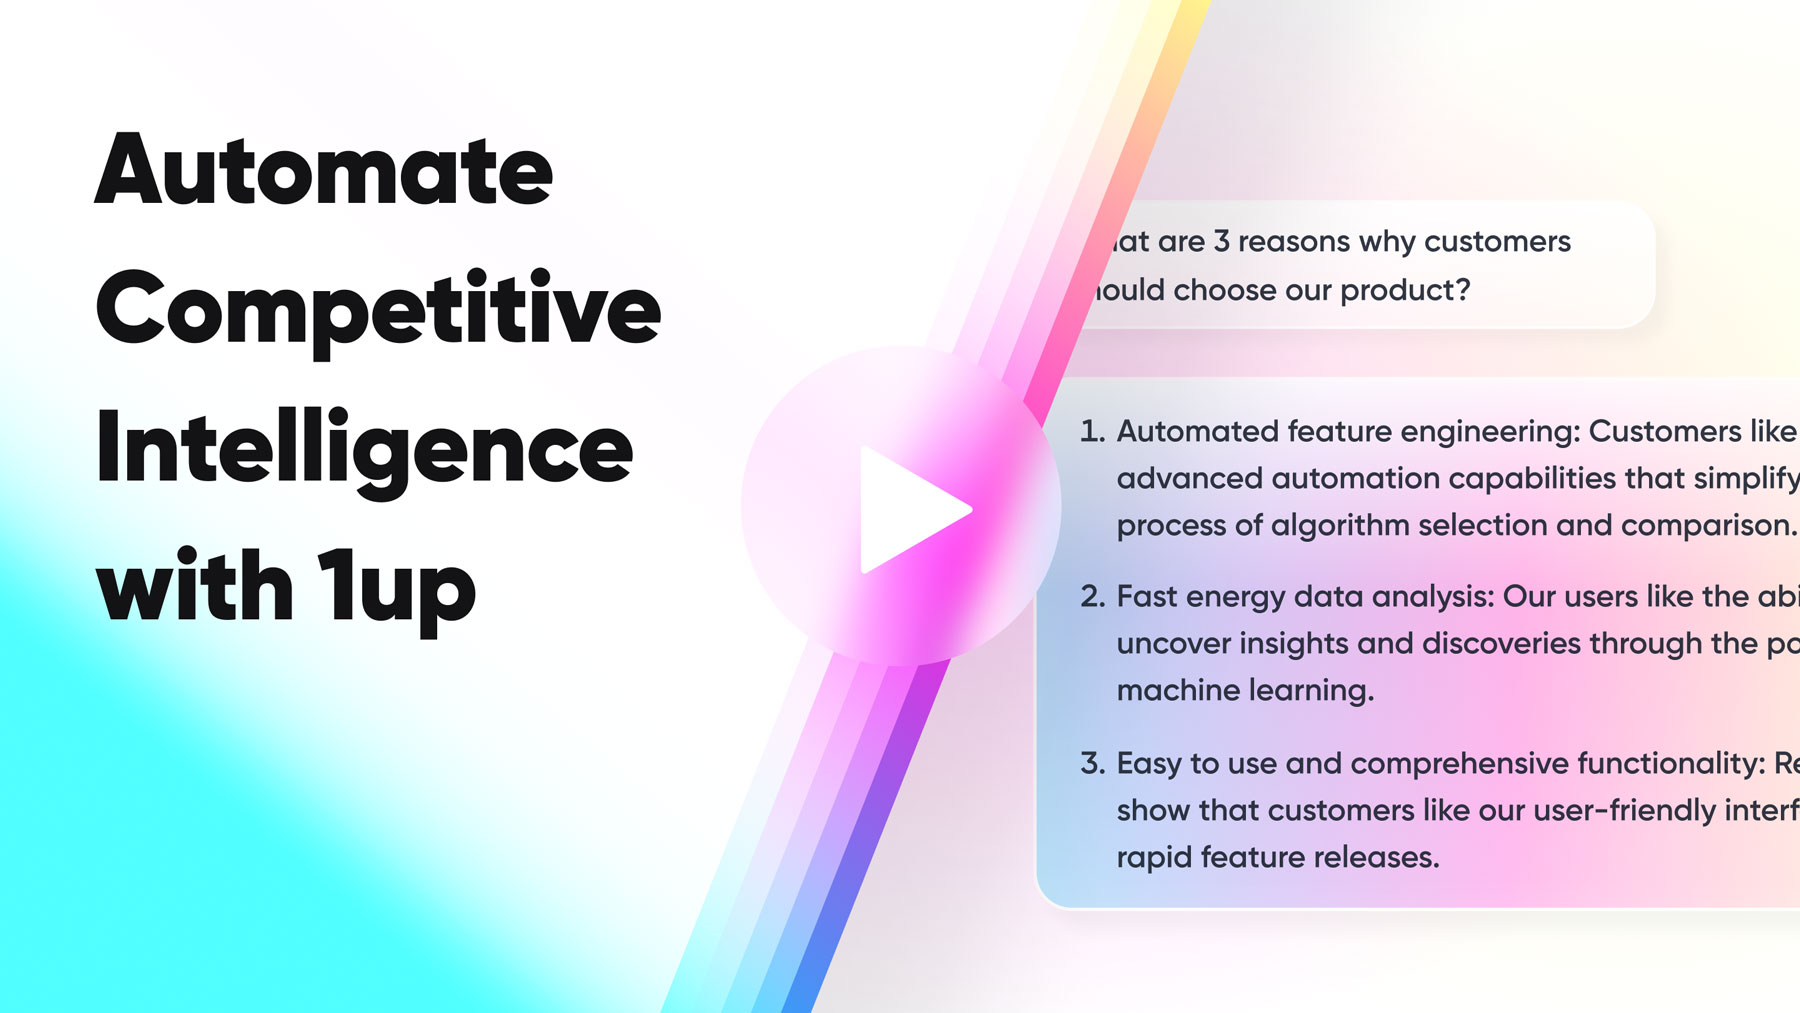 How to Automate Competitive Intelligence with 1up